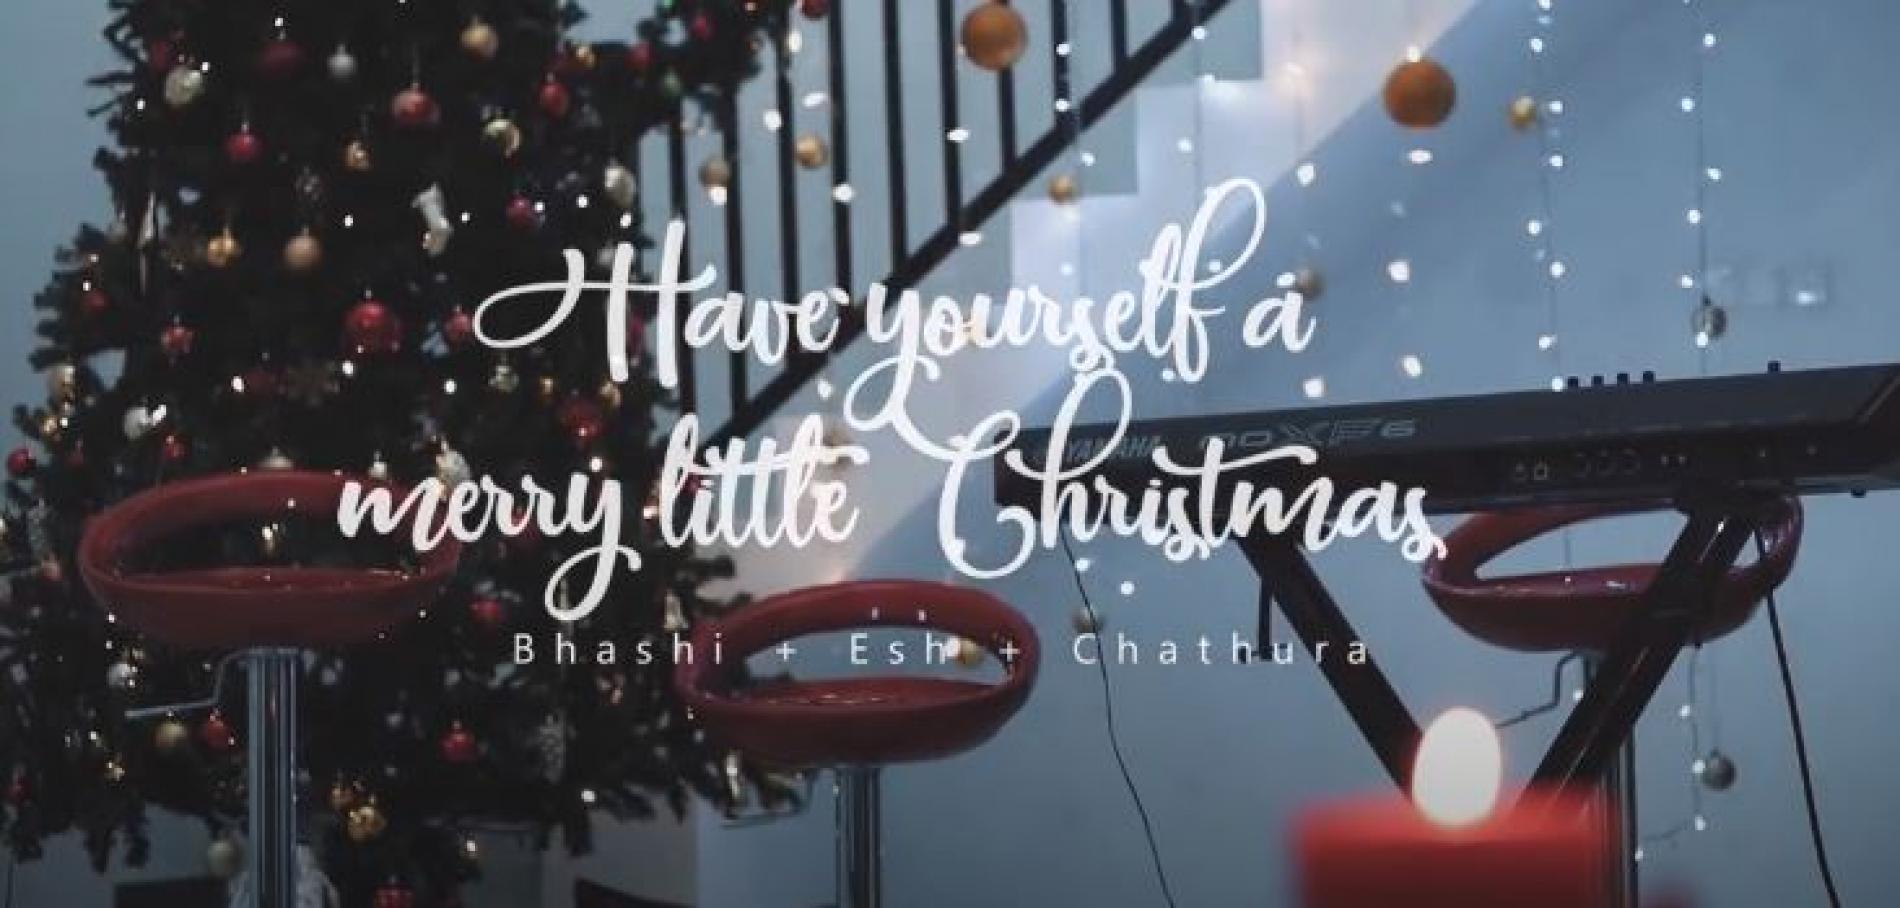 New Music : Bhashi Alwis – Have Yourself a Merry Little Christmas Feat Esh & Chathura